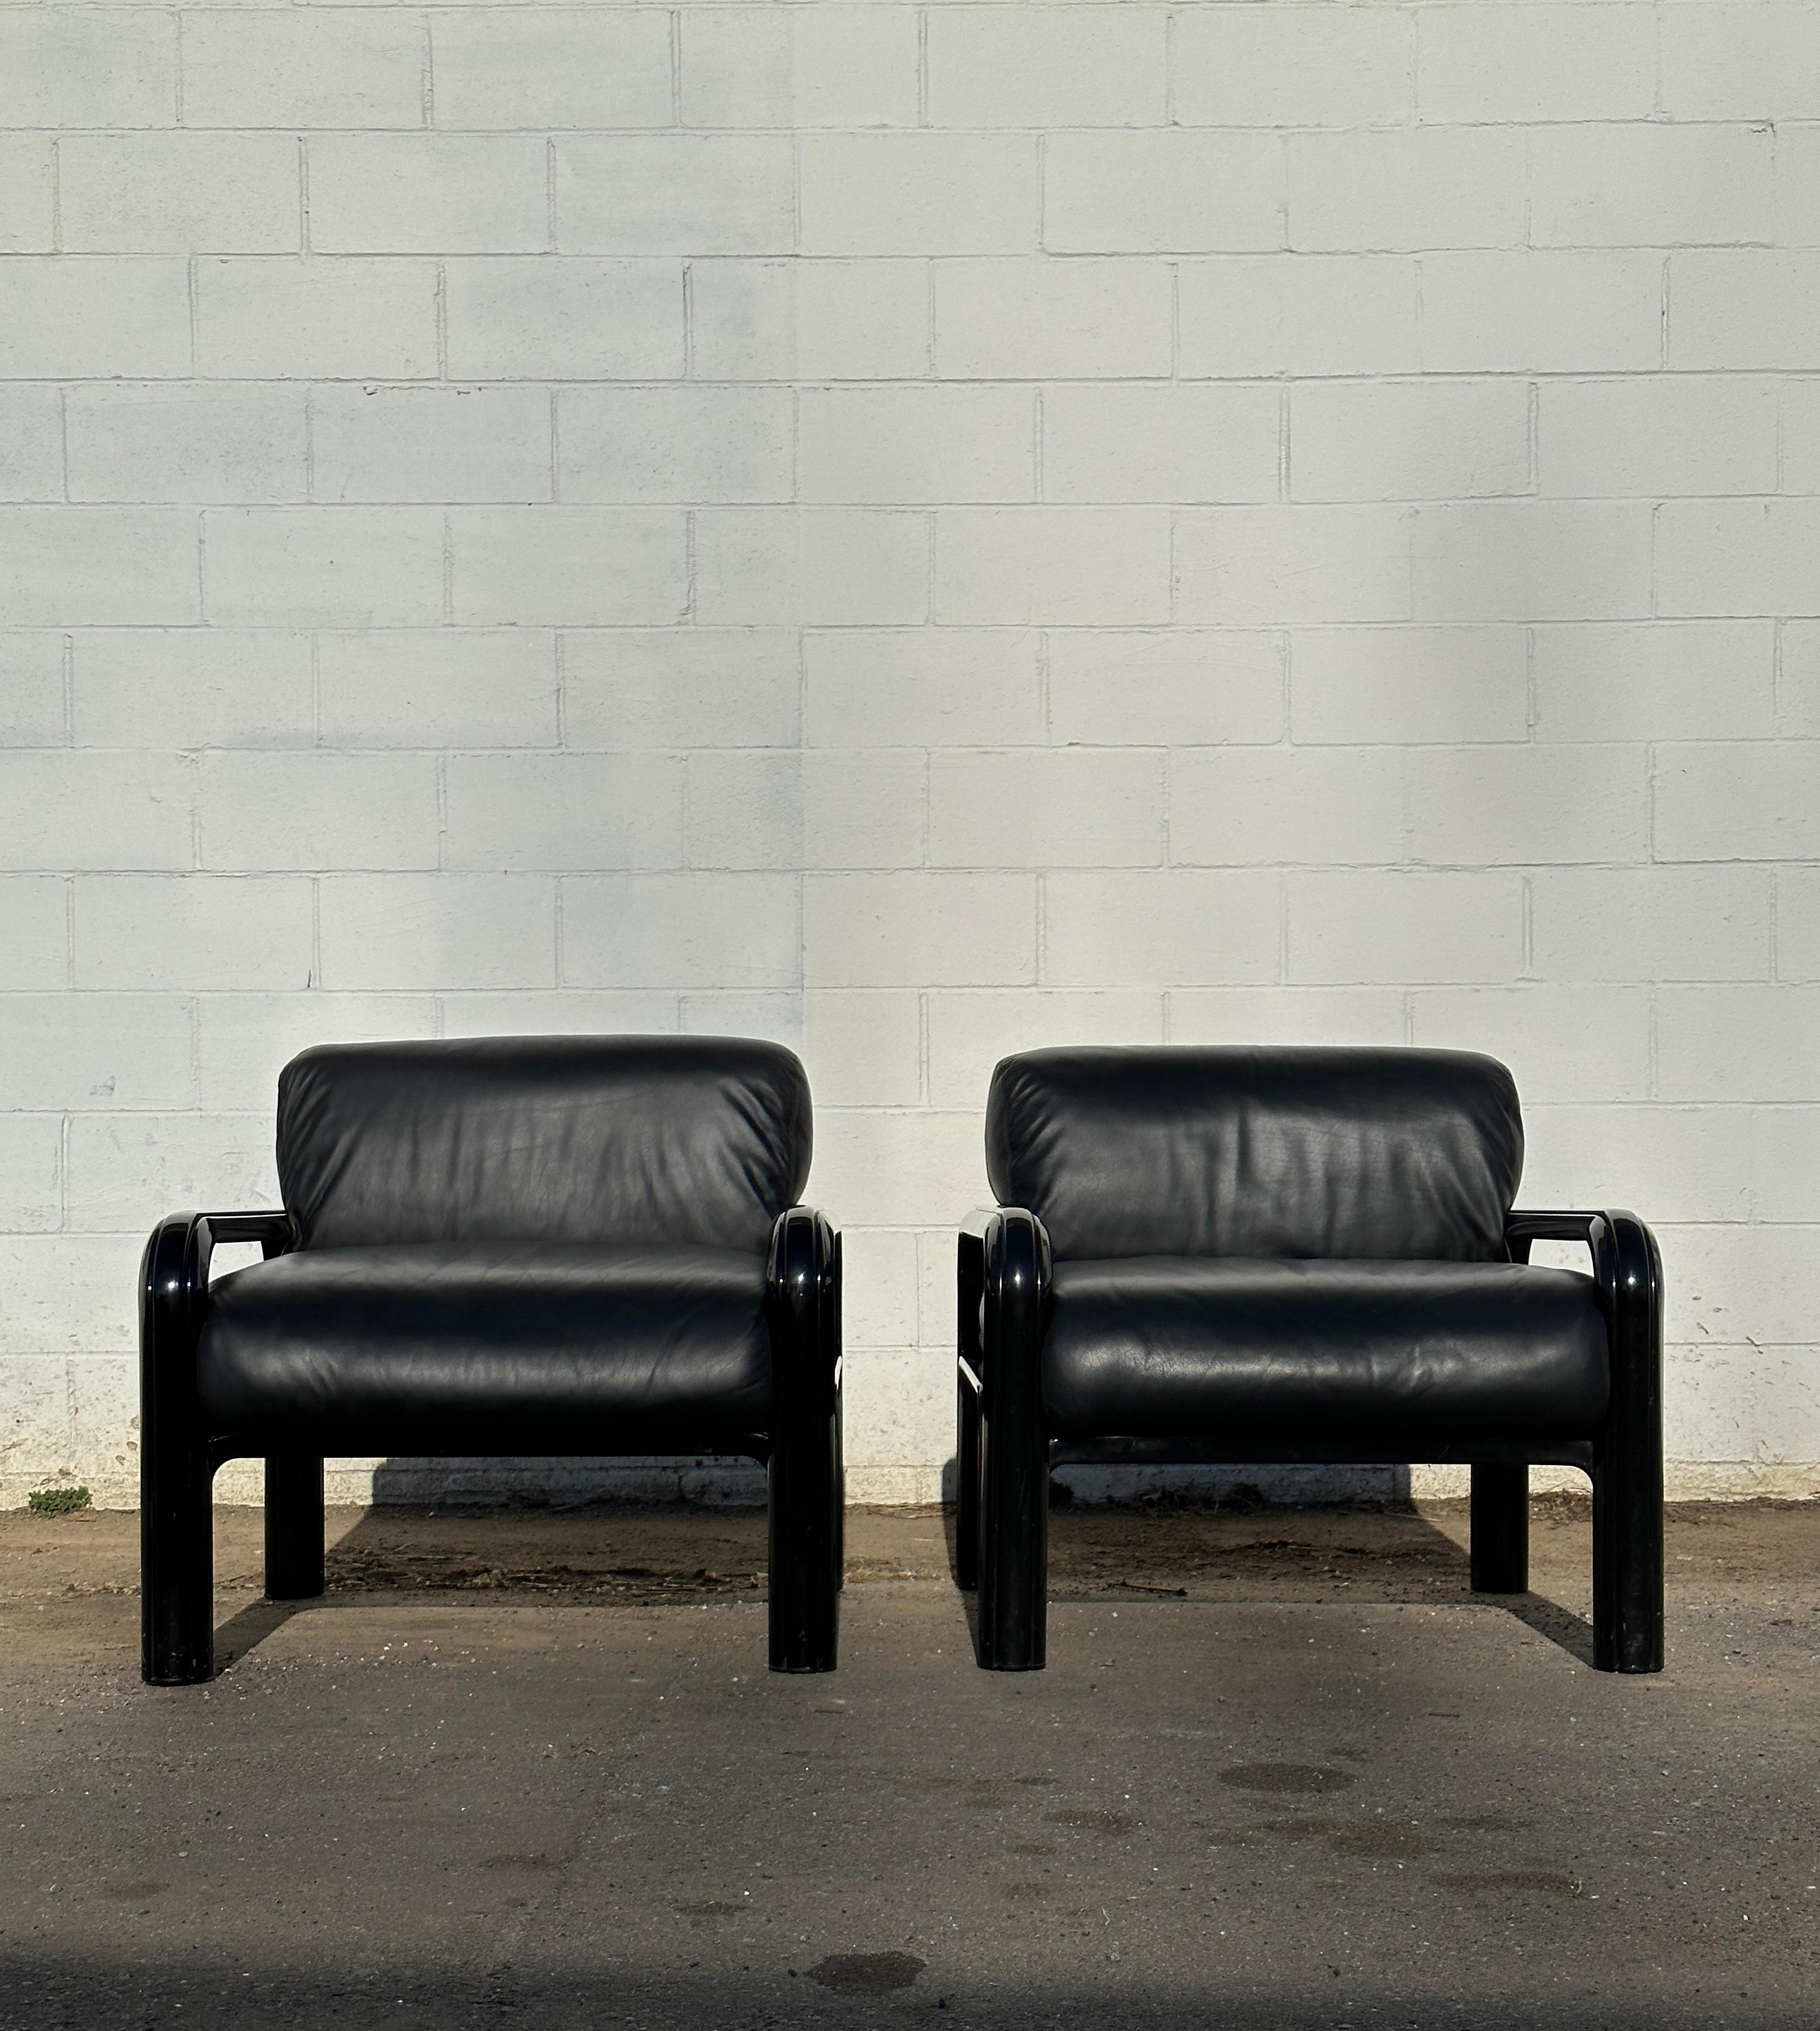 Pair of Gae Aulenti Black Leather Lounge Chairs for Knoll, Marked 2